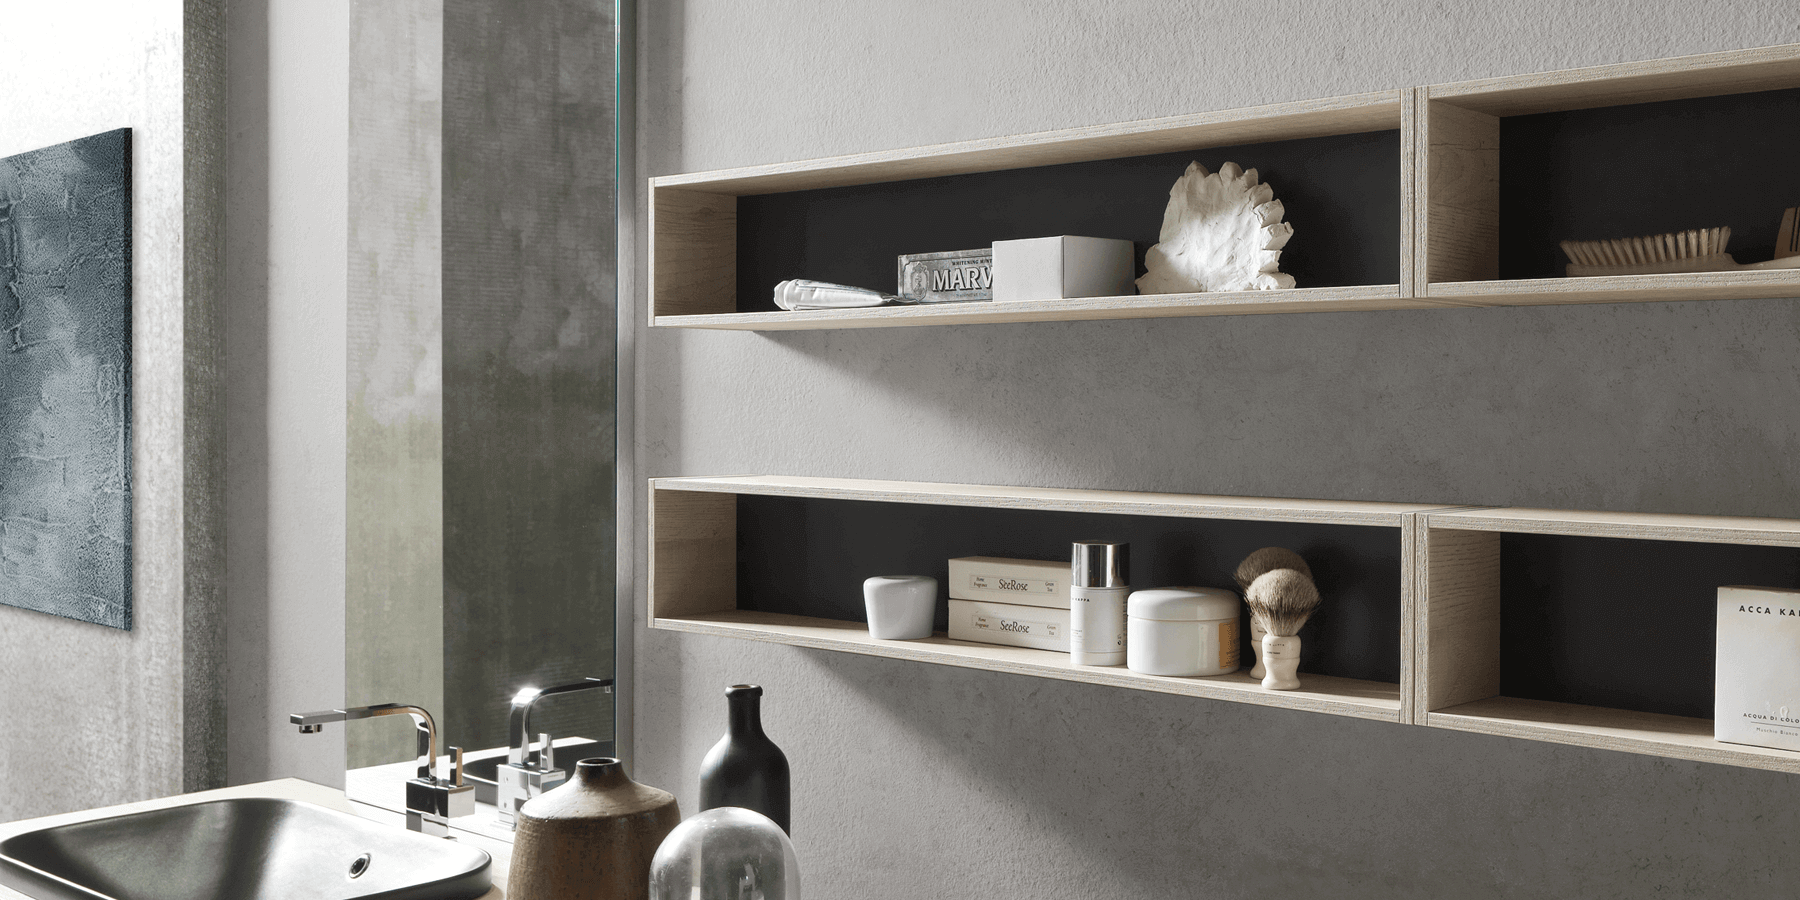 https://www.hastingsbathcollection.com/hubfs/Hastings_2023/images/02.%20Storage%20and%20Shelving/Luxury%20White%20Floating%20Open%20Shelves.png#keepProtocol